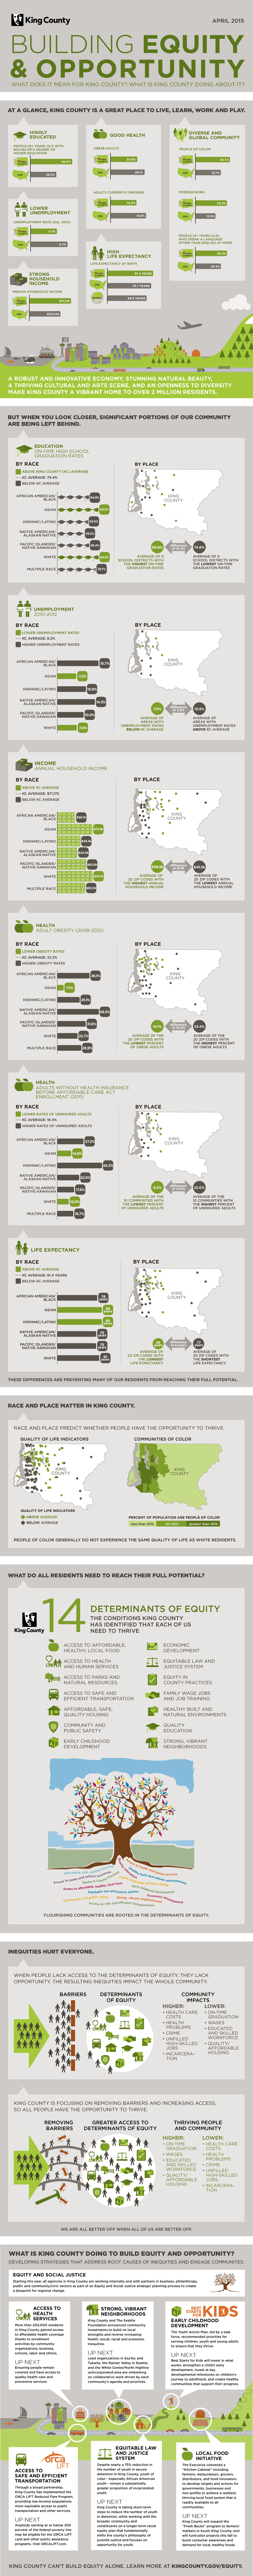 Building Equity Infographic - King County